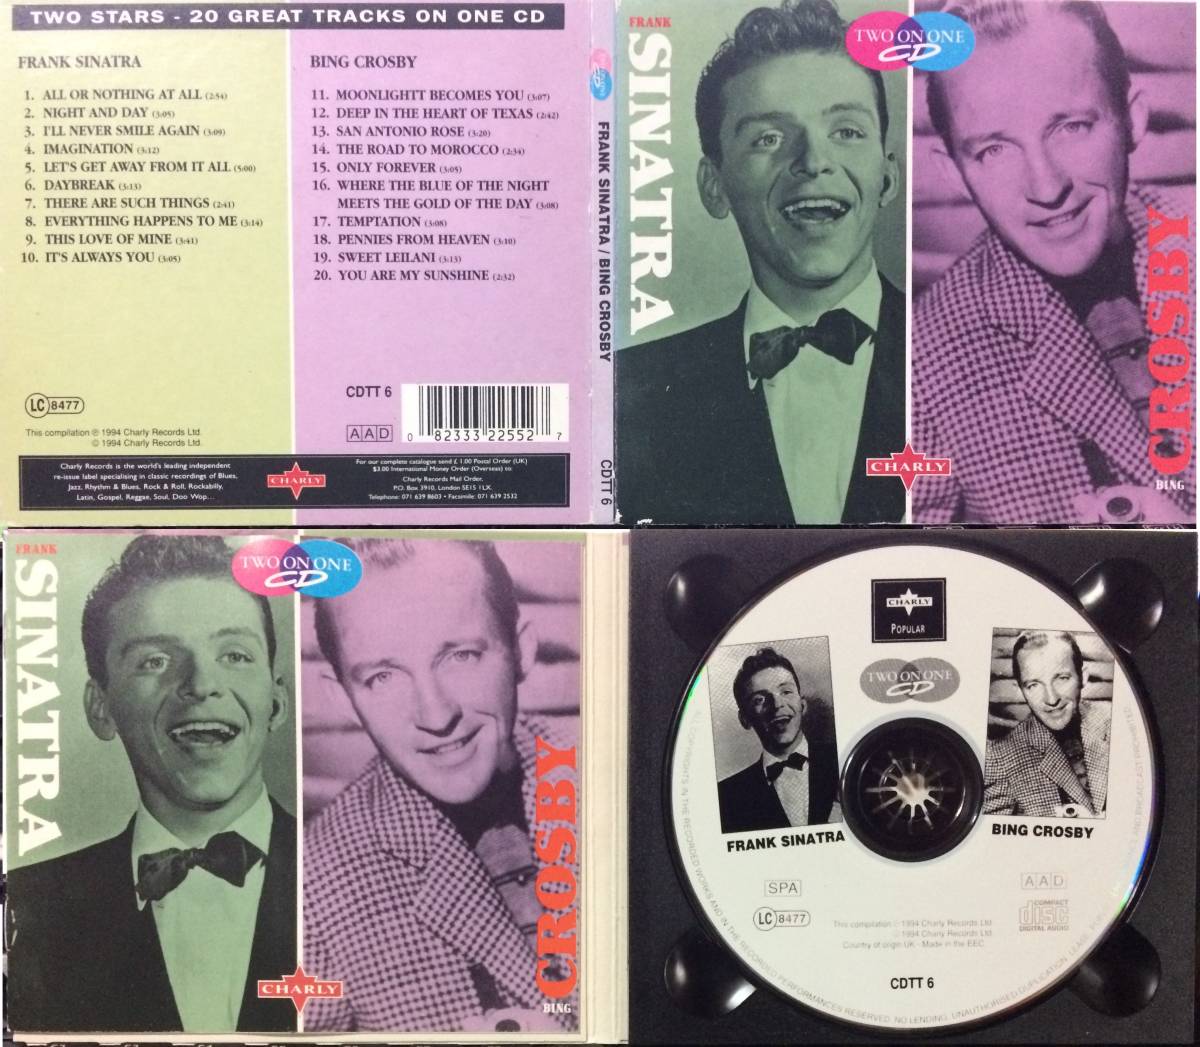 CD8枚 BING CROSBY BIG ARTIST ALBUM,WHITE CHRISTMAS,16 MOST REQUESTED SONGS,THE BEST OF ビング クロスビー_画像4